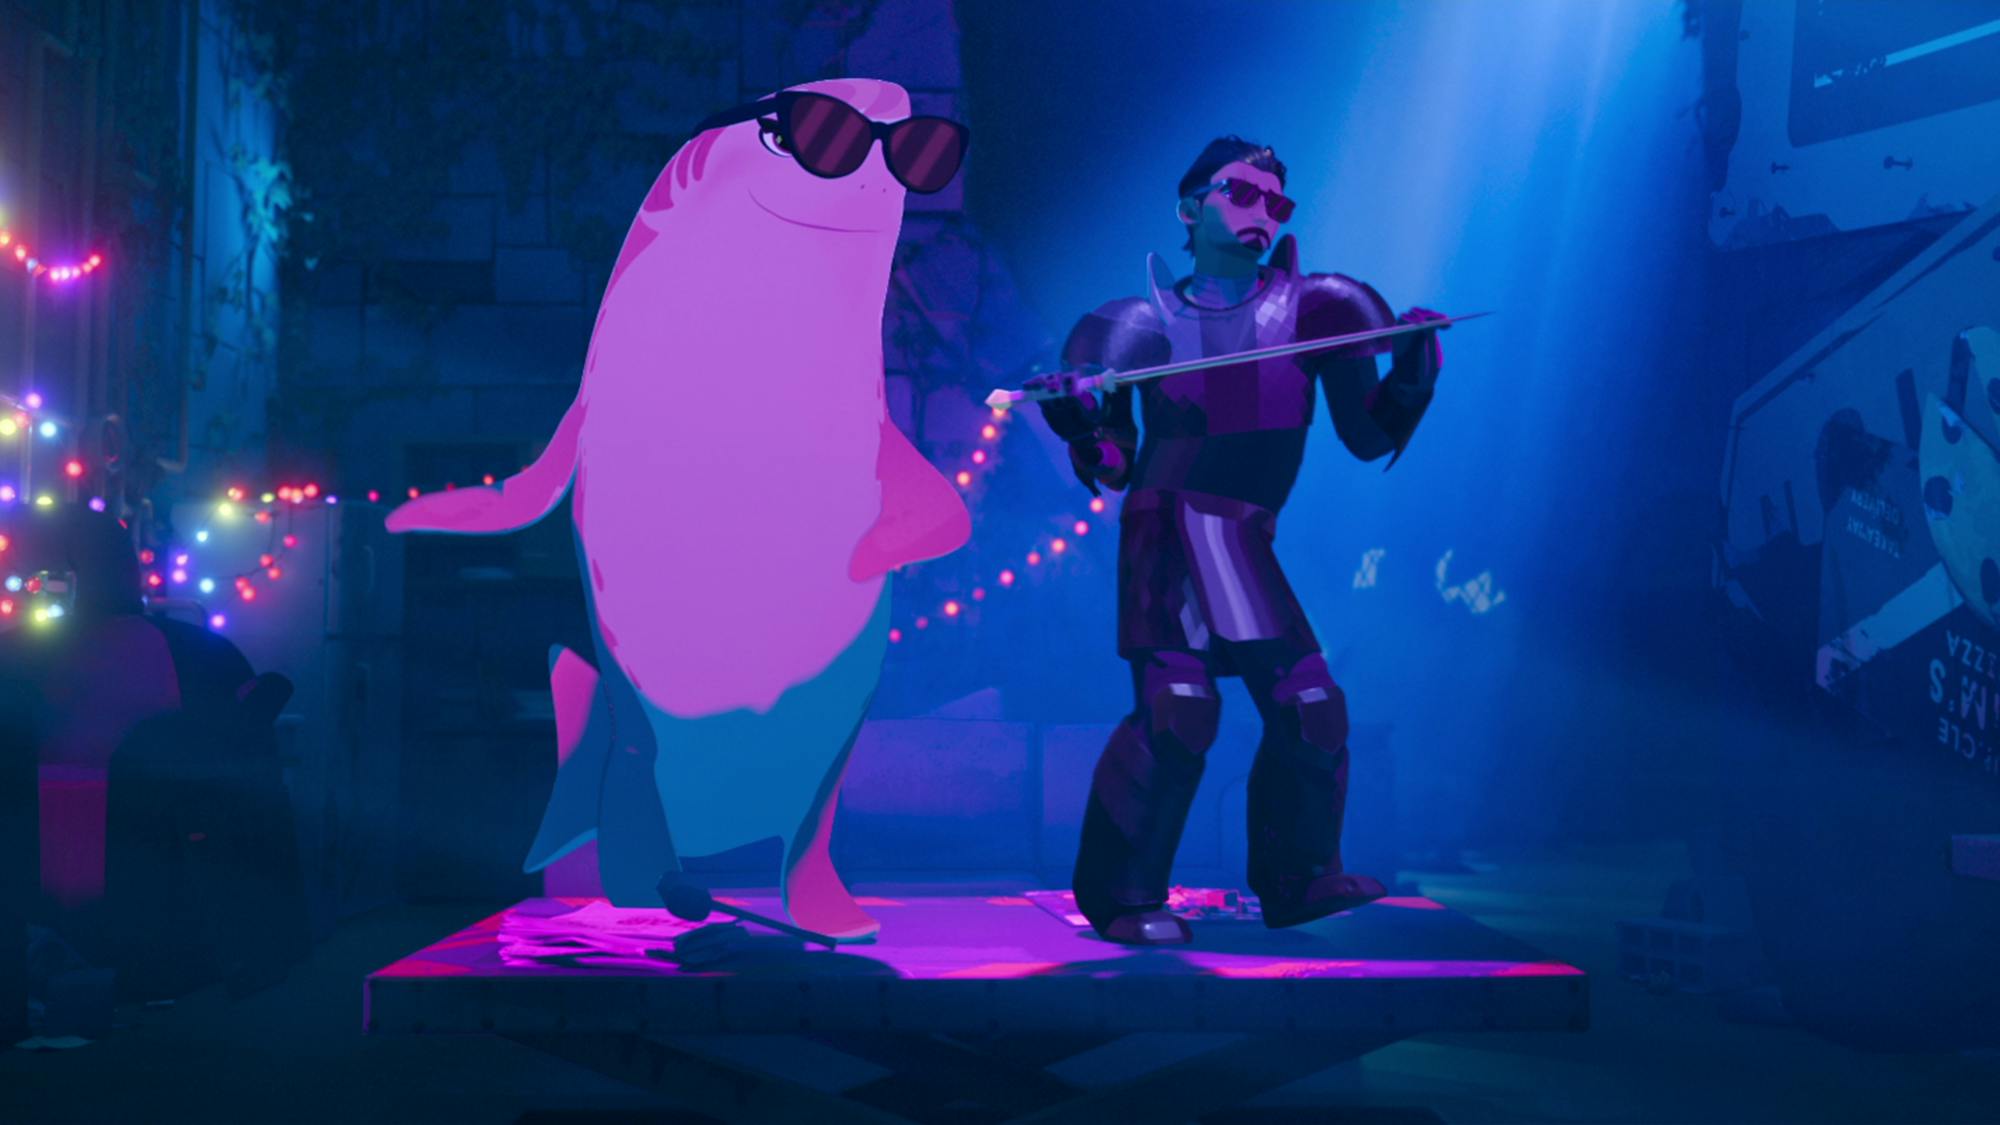 Nimona (Chloë Grace Moretz) and Ballister Boldheart (Riz Ahmed) dance in a neon rainbow-lit club. Nimona shapeshifts as a shark. Both characters wear sunglasses and look like they could be singing and dancing to a karaoke song.